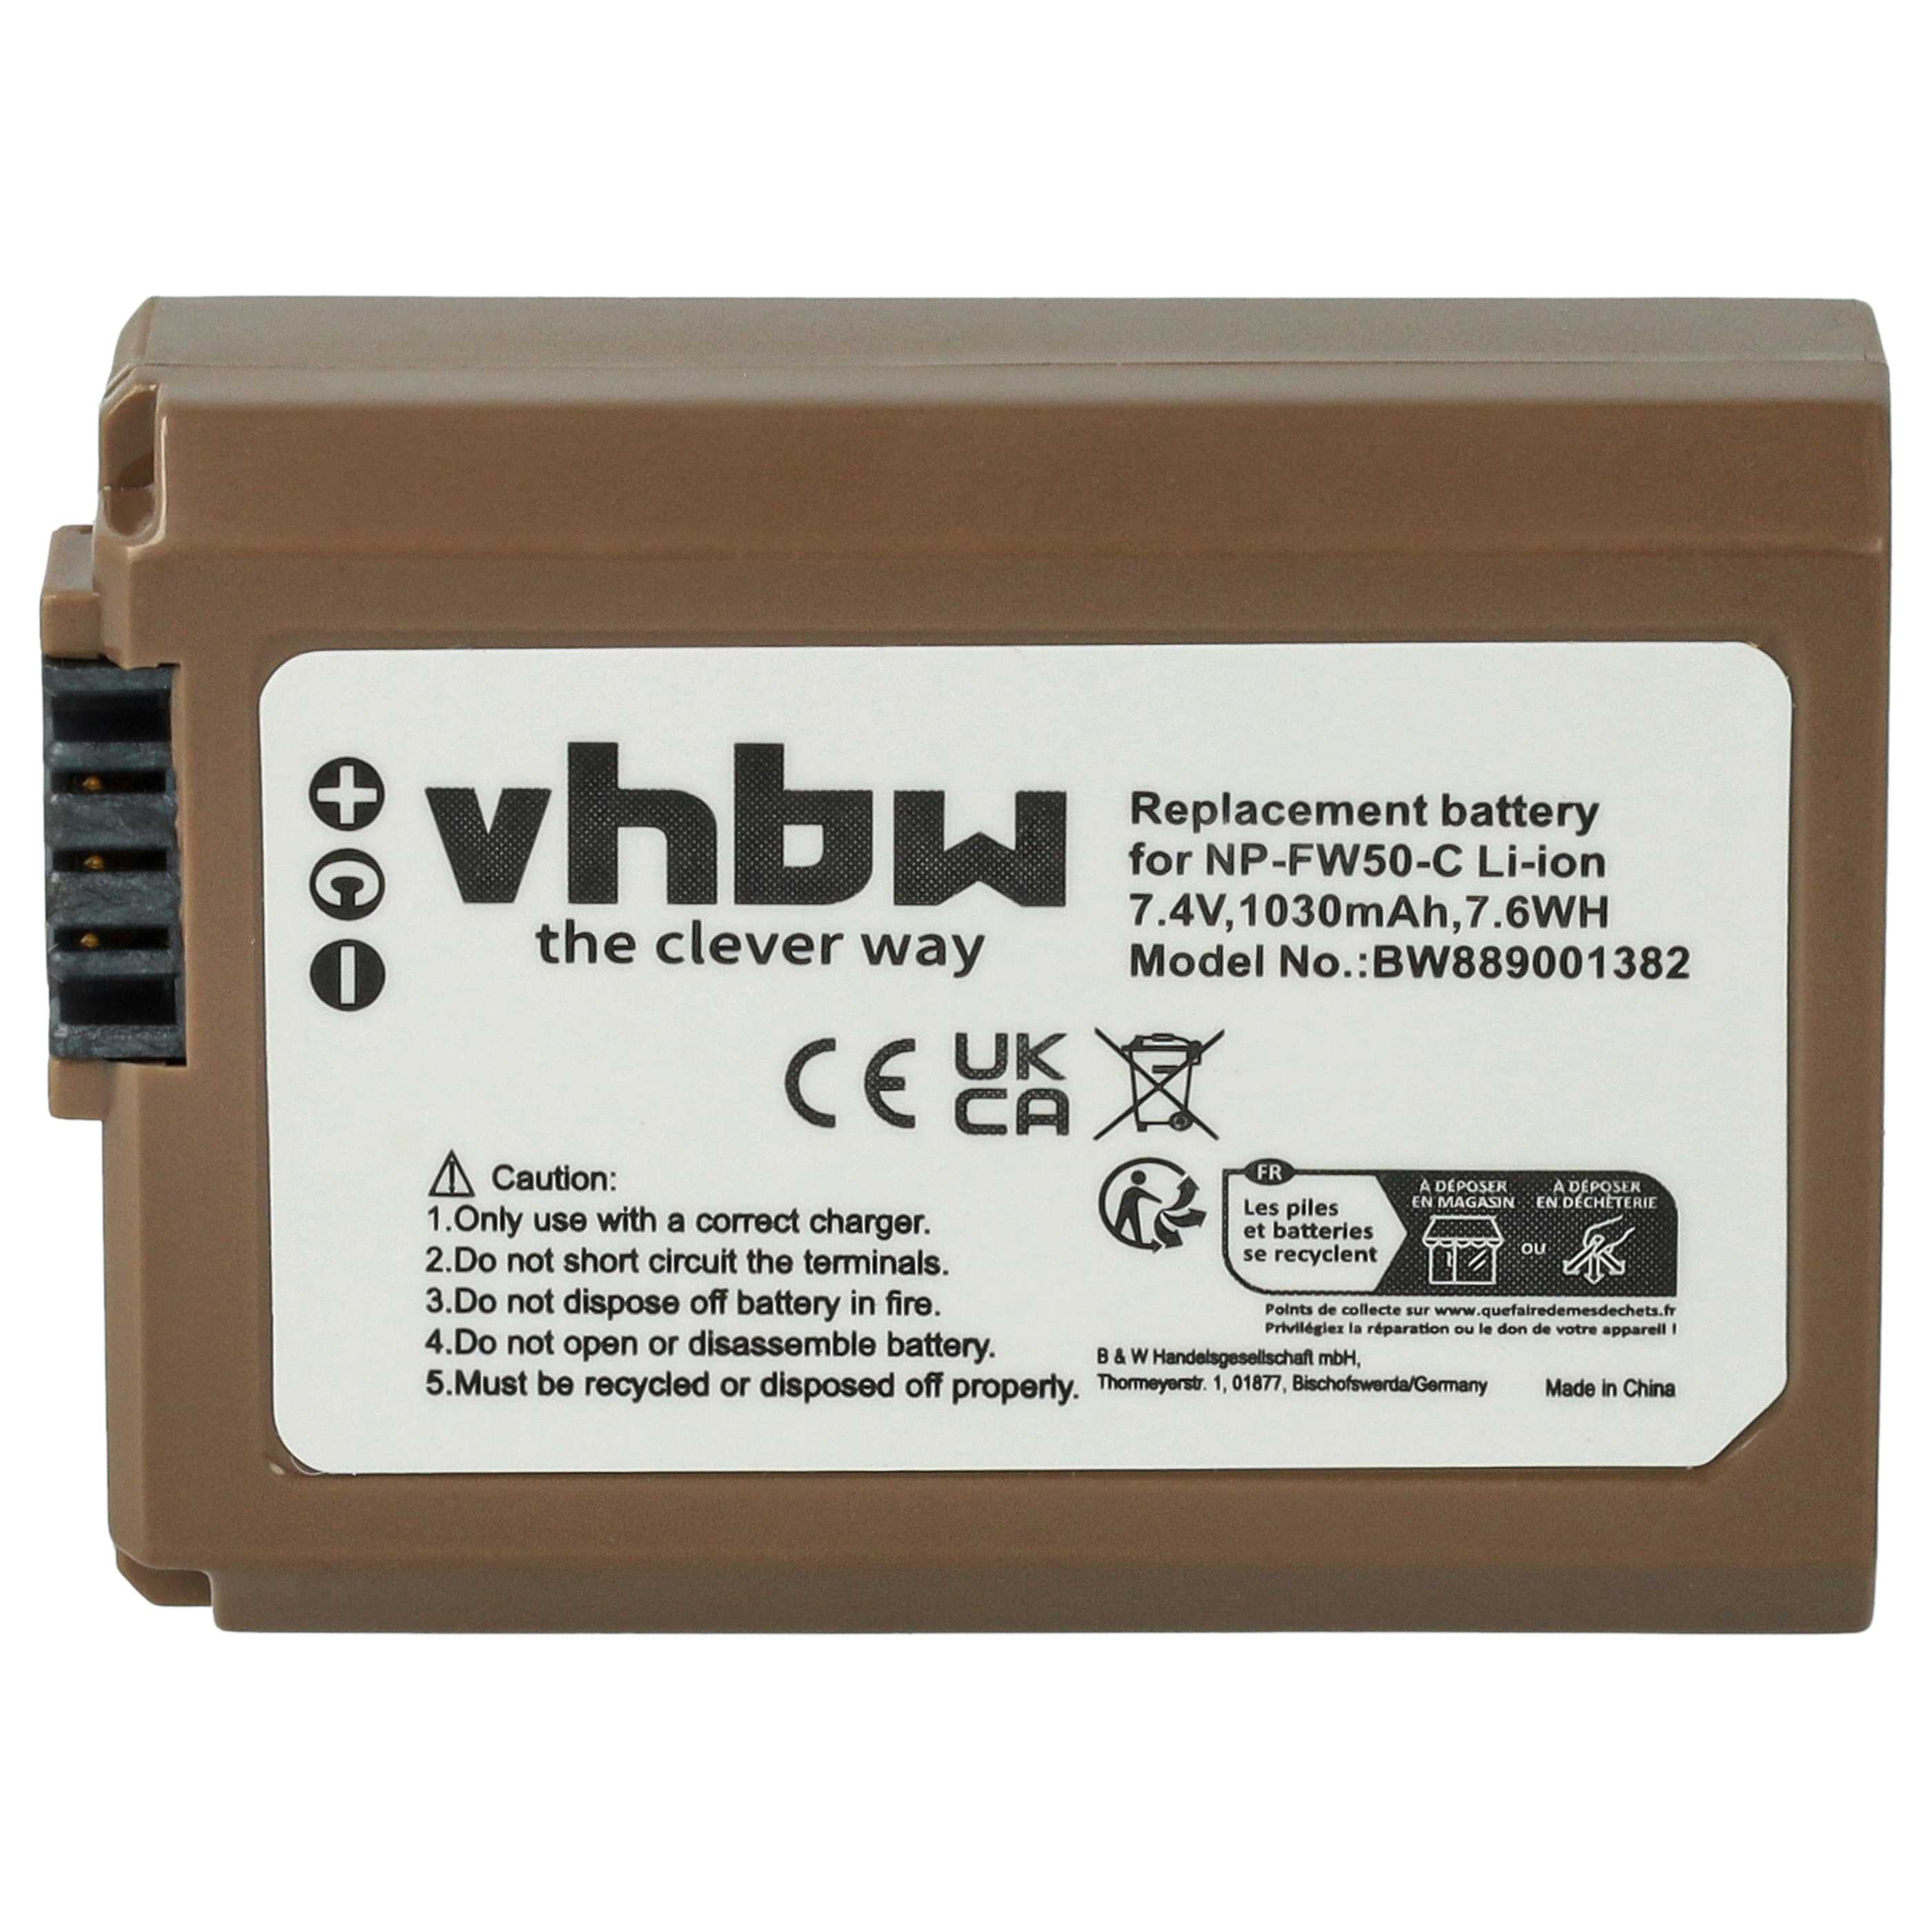 Battery Replacement for Sony NP-FW50 - 1030mAh, 7.4V, Li-Ion with Info Chip, with USB C Socket